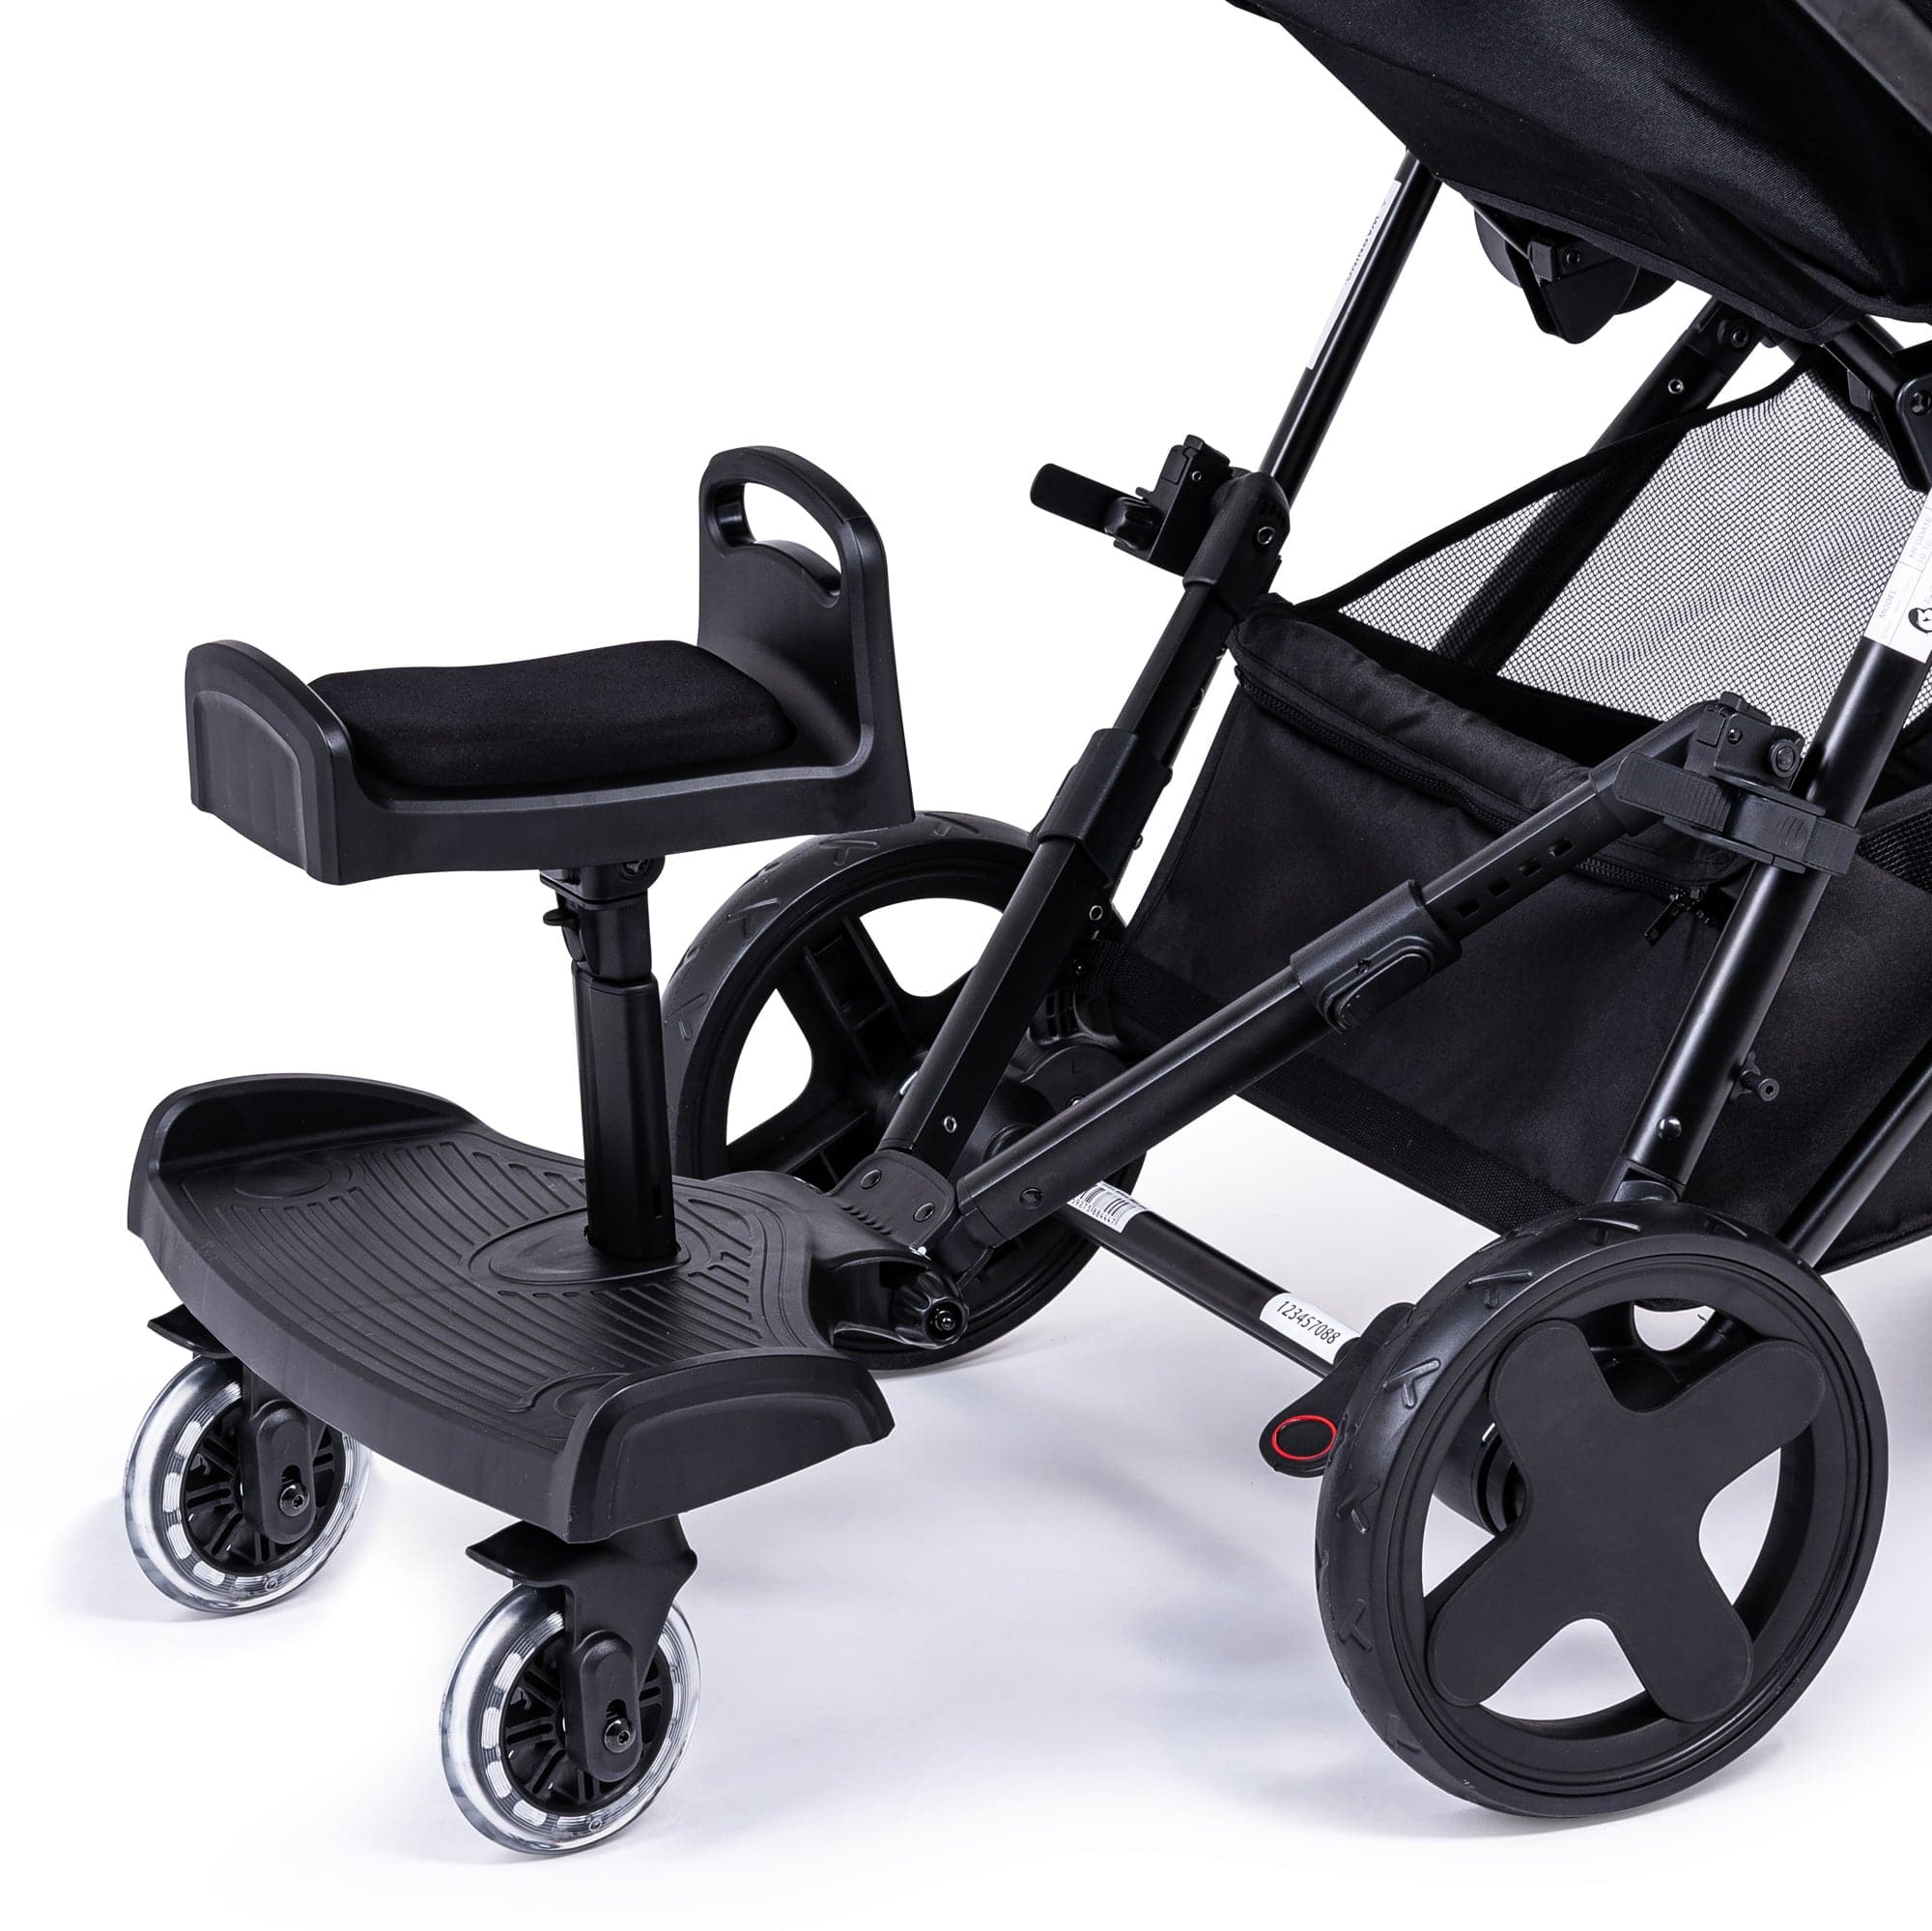 Ride On Board with Seat Compatible with Petite Star - For Your Little One